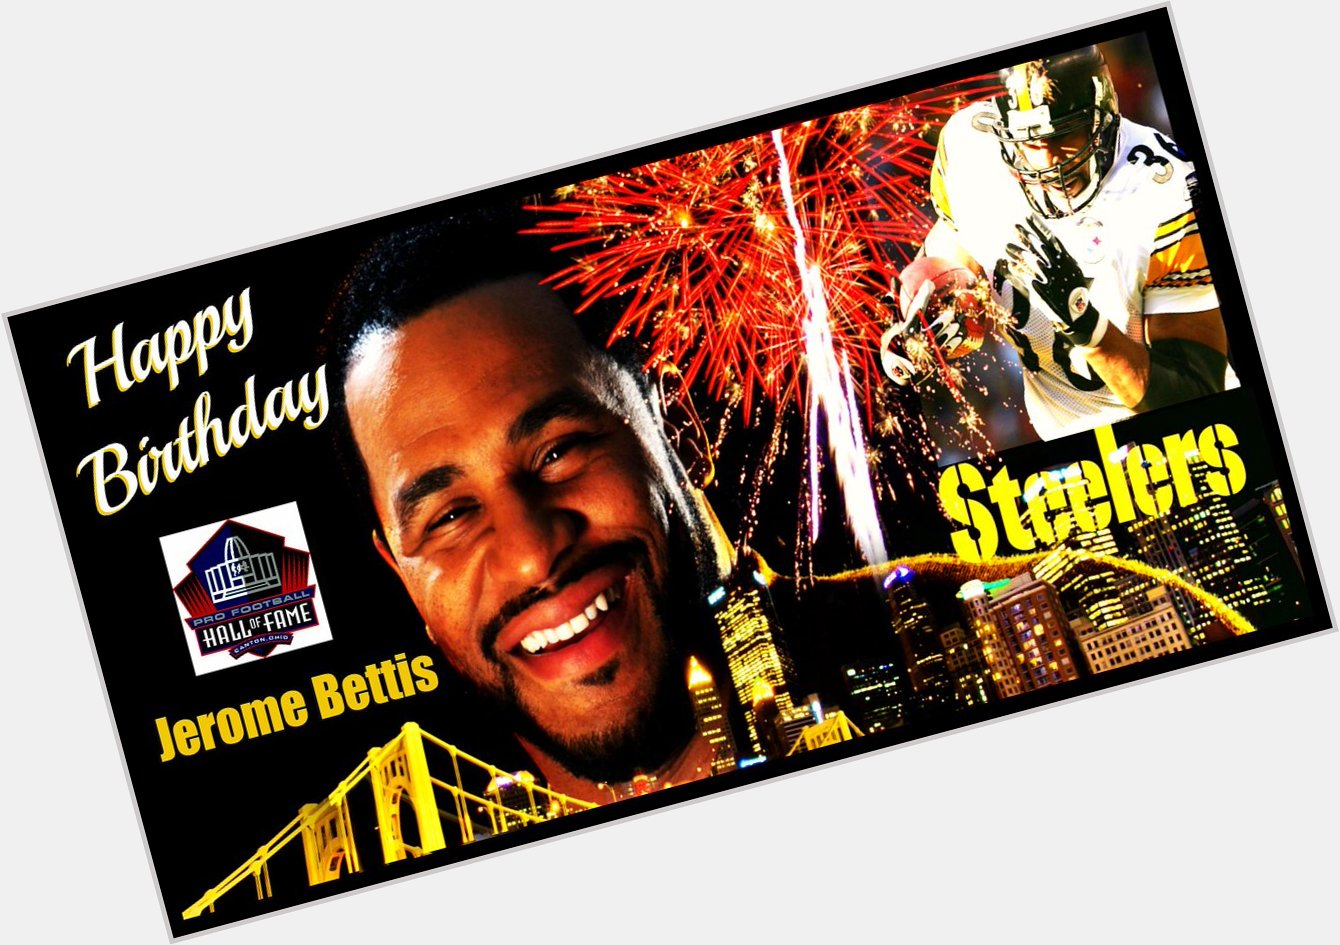 Wishing NFL HoF RB Jerome Bettis a very Happy BDay! Hoping your day will be as special as you are! 